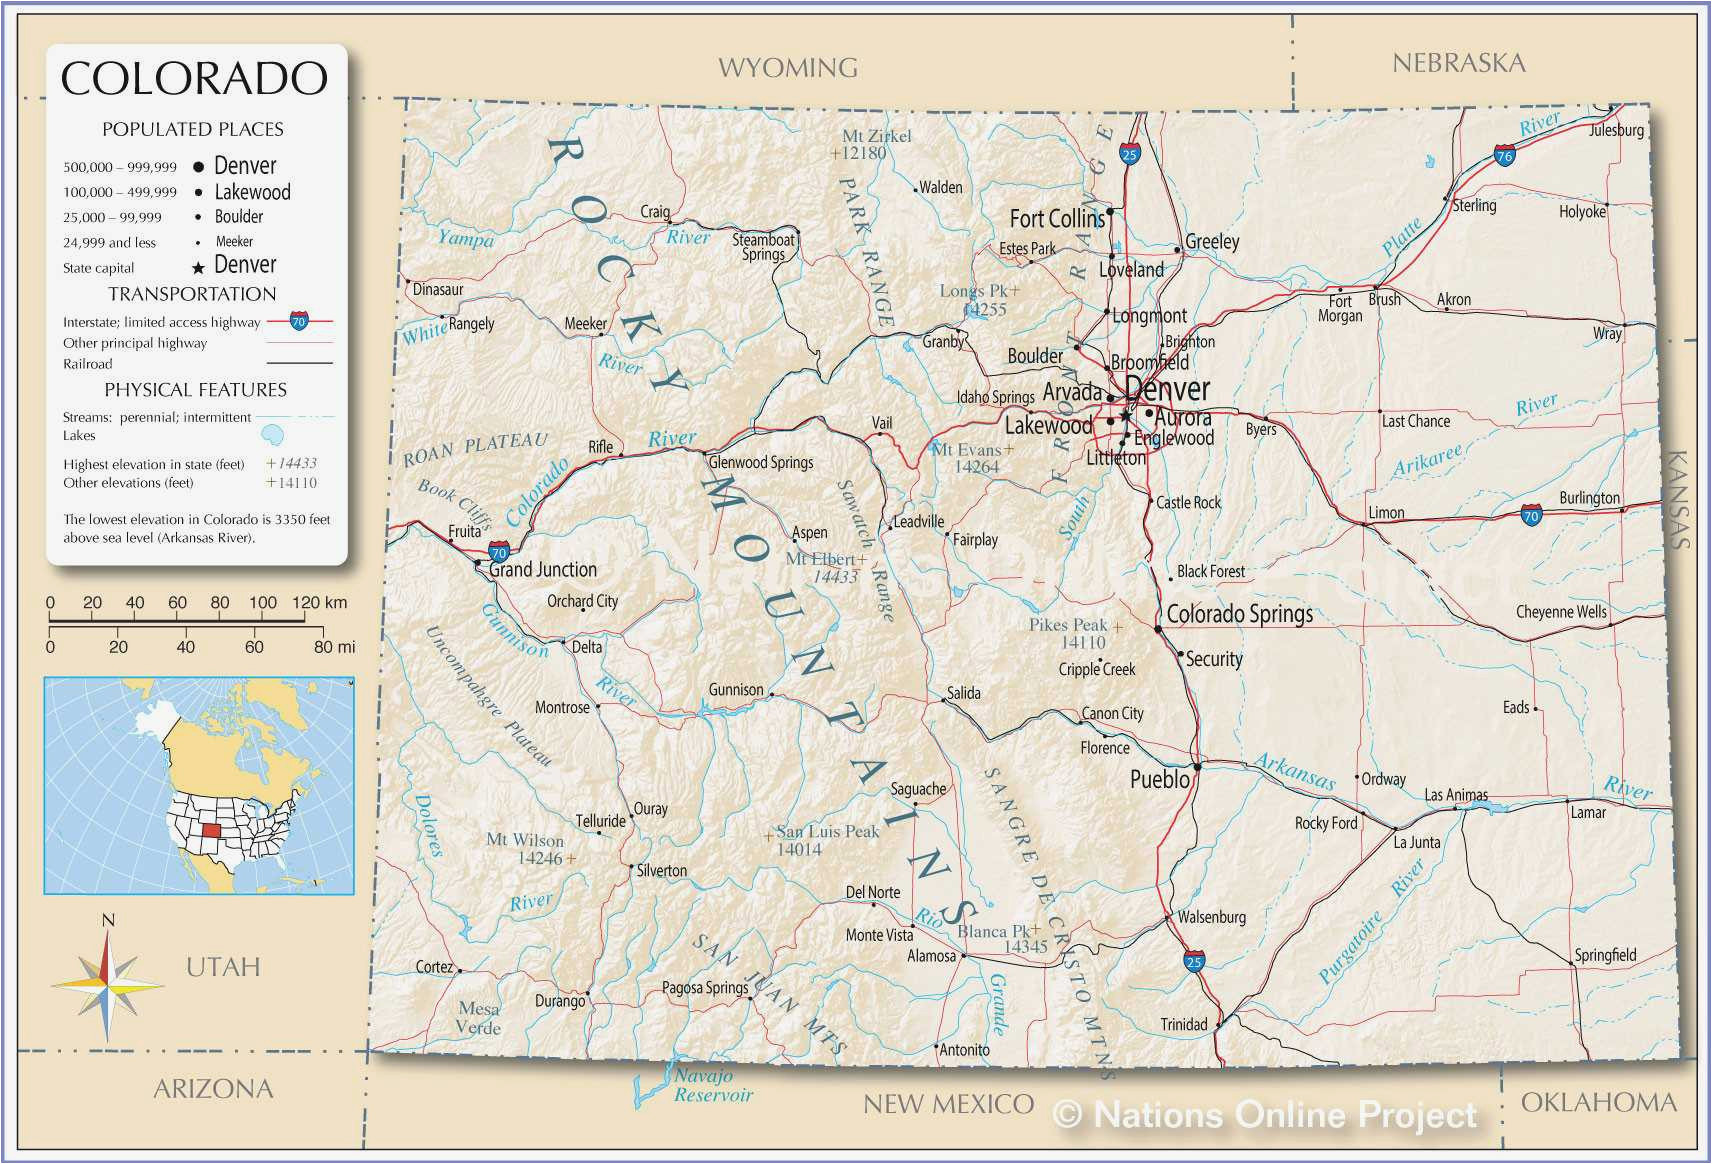 Wyoming Ohio Map Colorado Map with Counties and Cities Secretmuseum